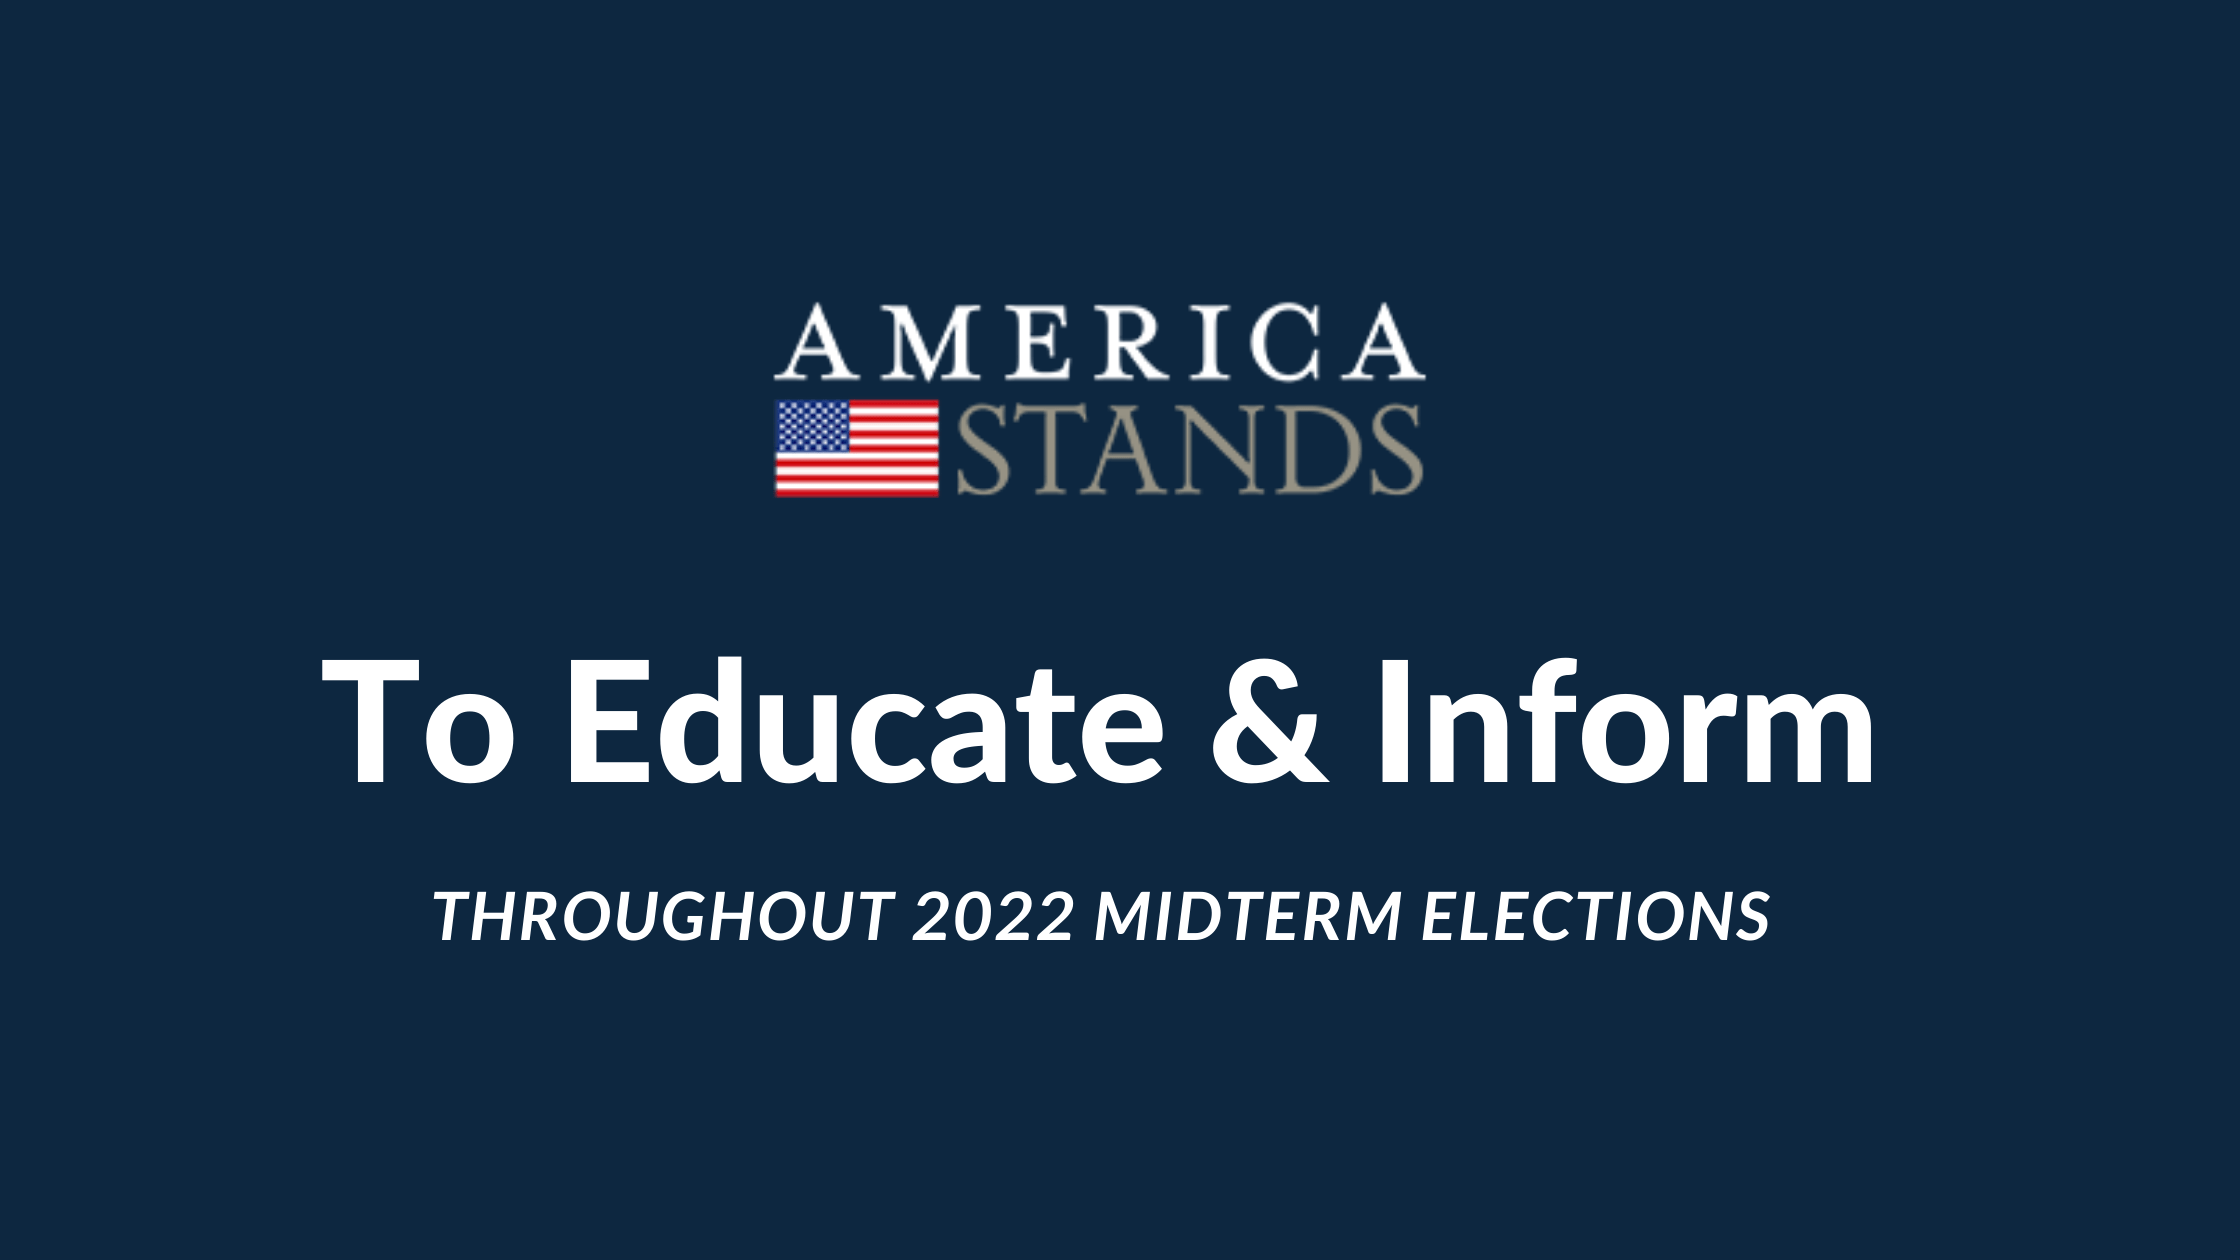 America Stands 2022 Midterm Elections